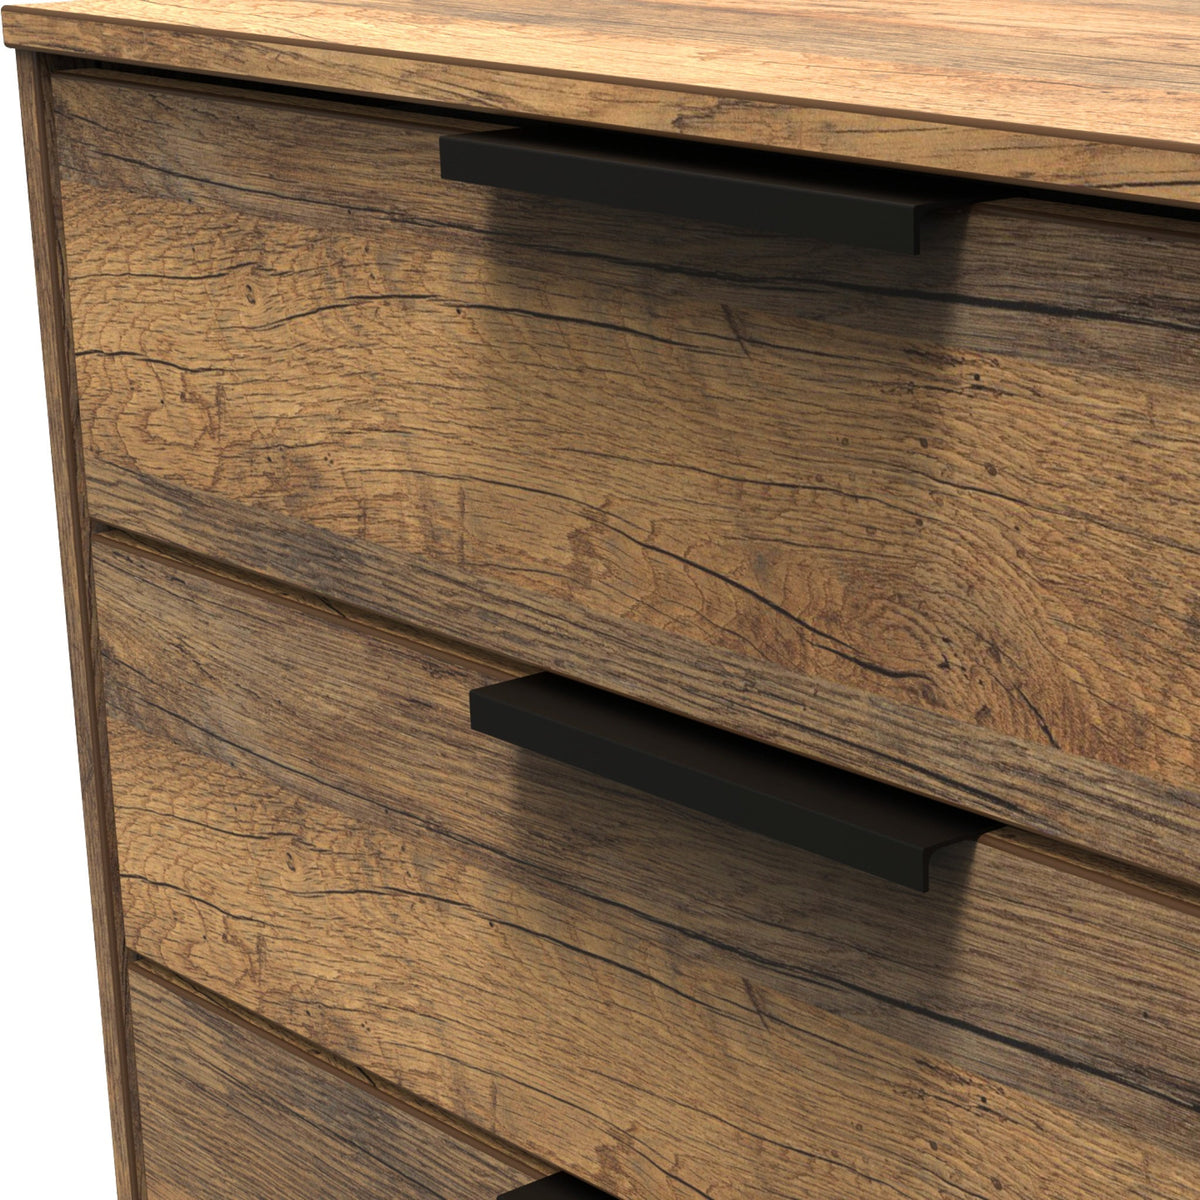 Moreno Rustic Oak 3 Drawer Midi Chest with Black Hairpin Legs close up